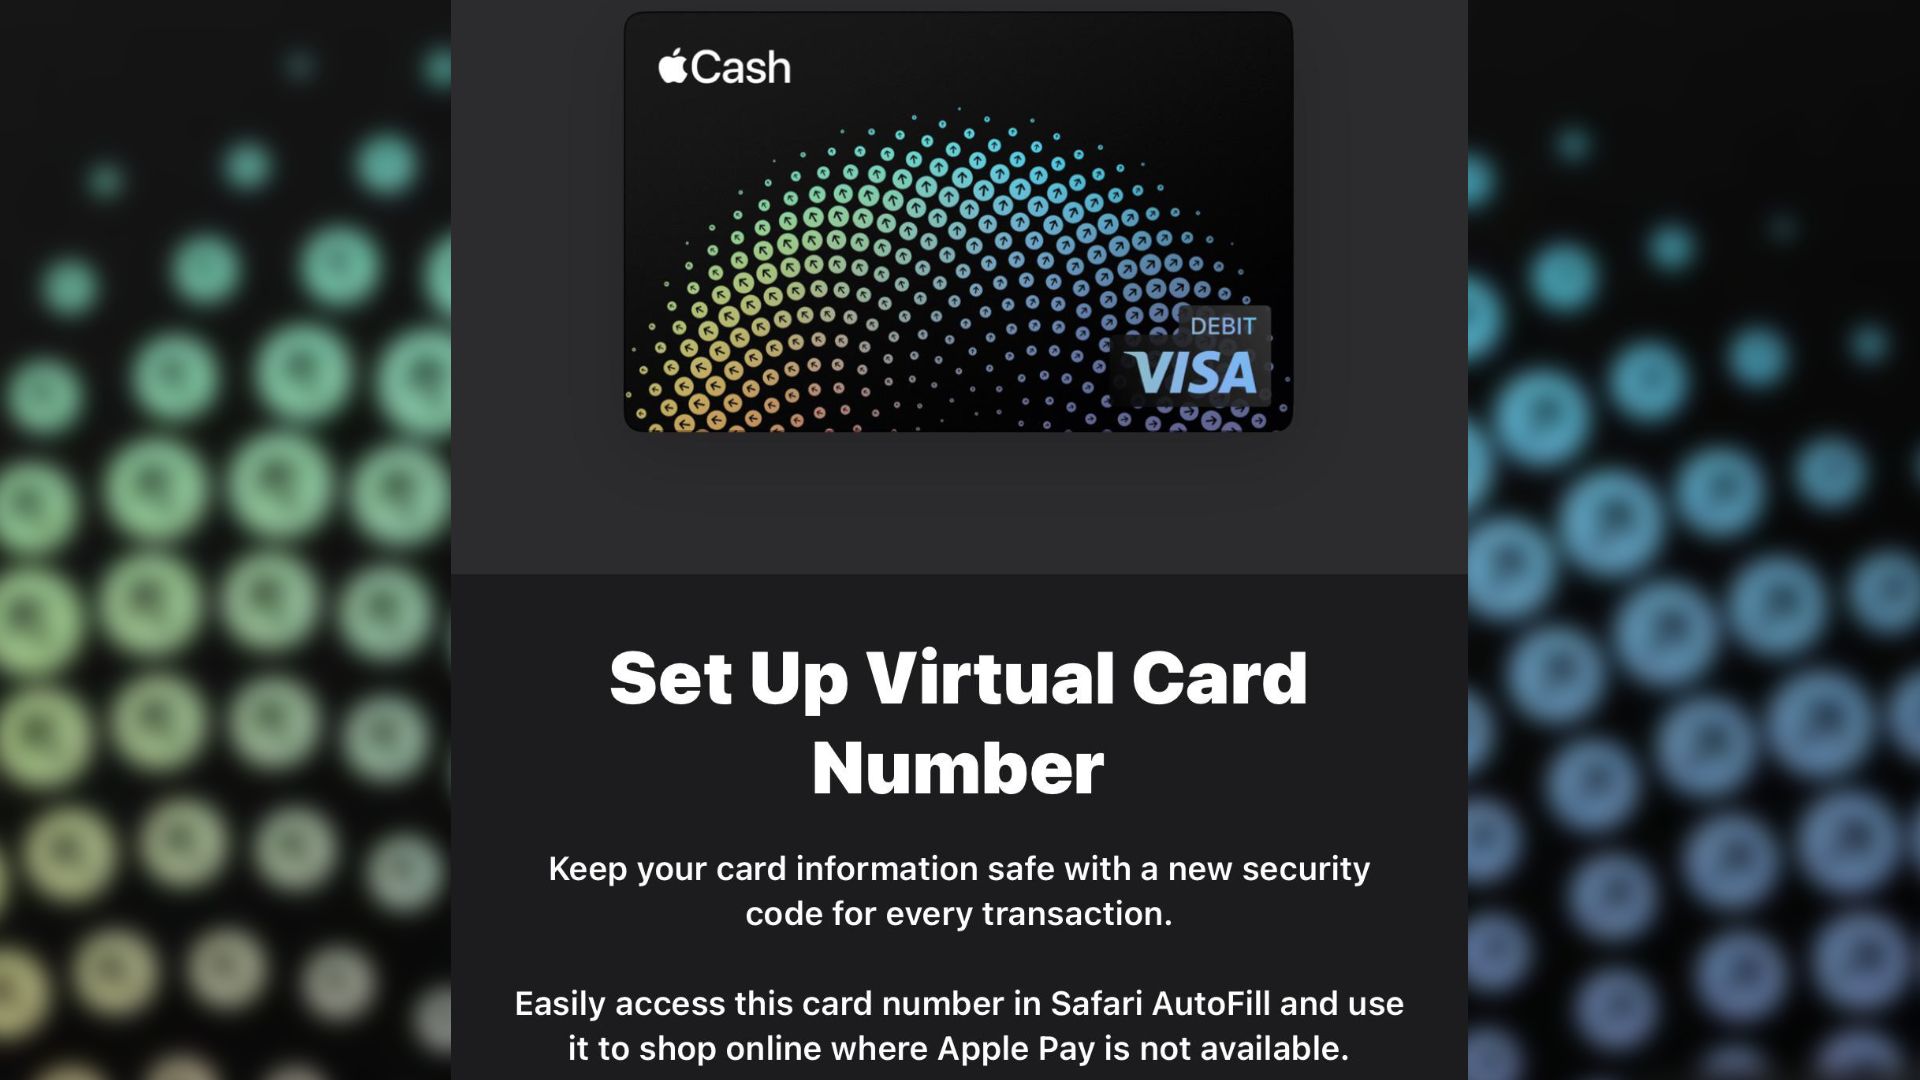 Later next month, iPhone owners running iOS 17.4 will be able to generate a virtual card number for spending Apple Cash when Apple Pay isn't an online